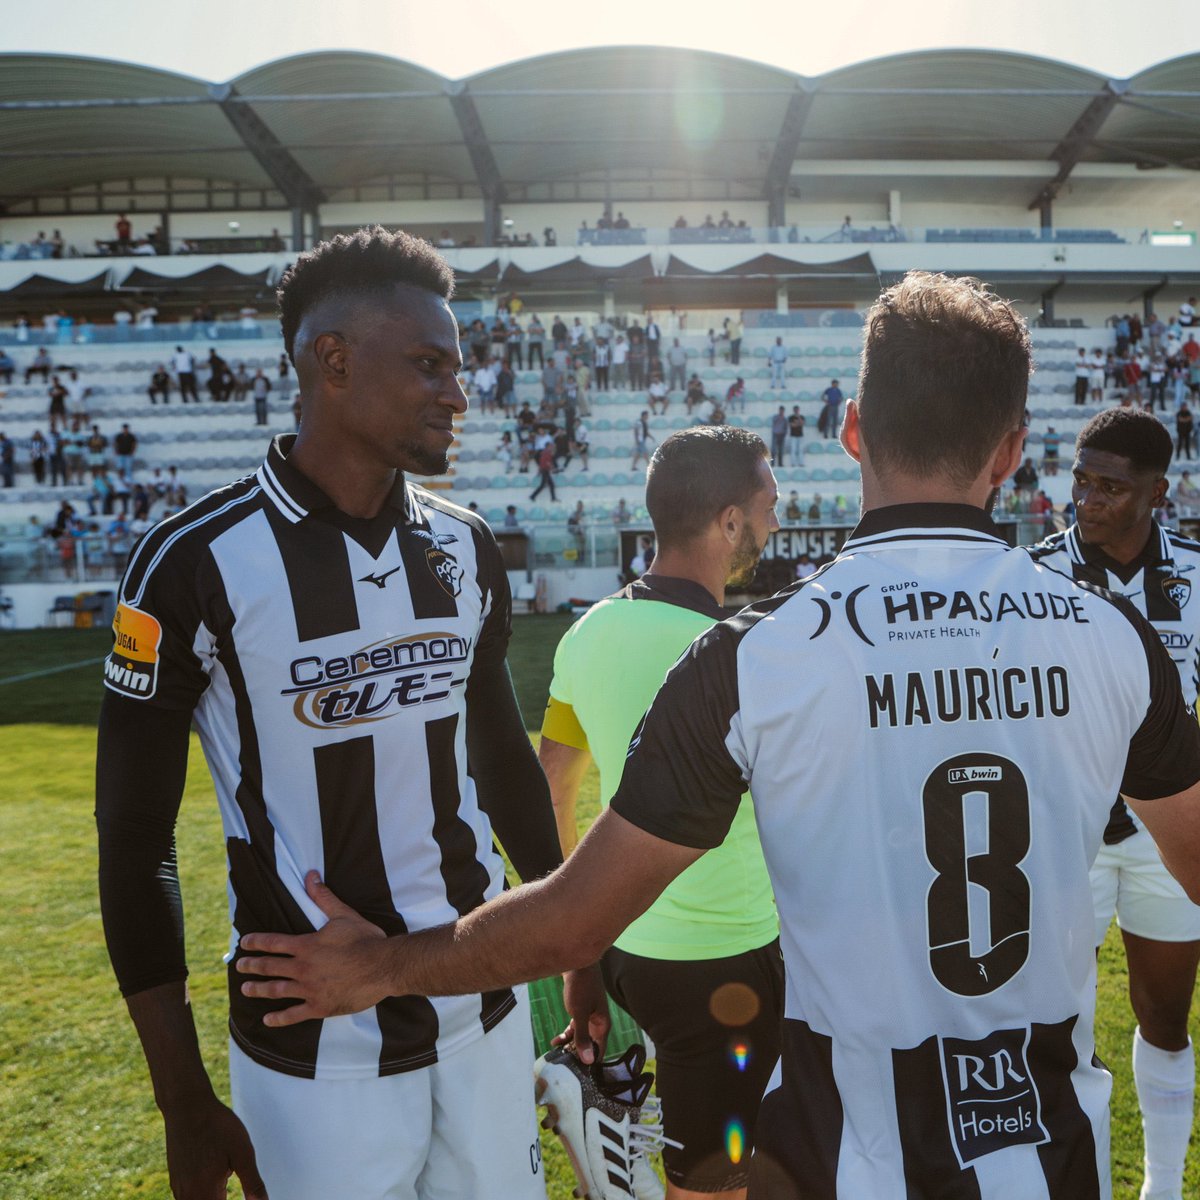 Portimonense are the southern most club on the mainland of Portugal to play in Primeira Liga this season (Farense will take that over next season).

They play in the city of Portimão in the Algarve religion of Portugal.